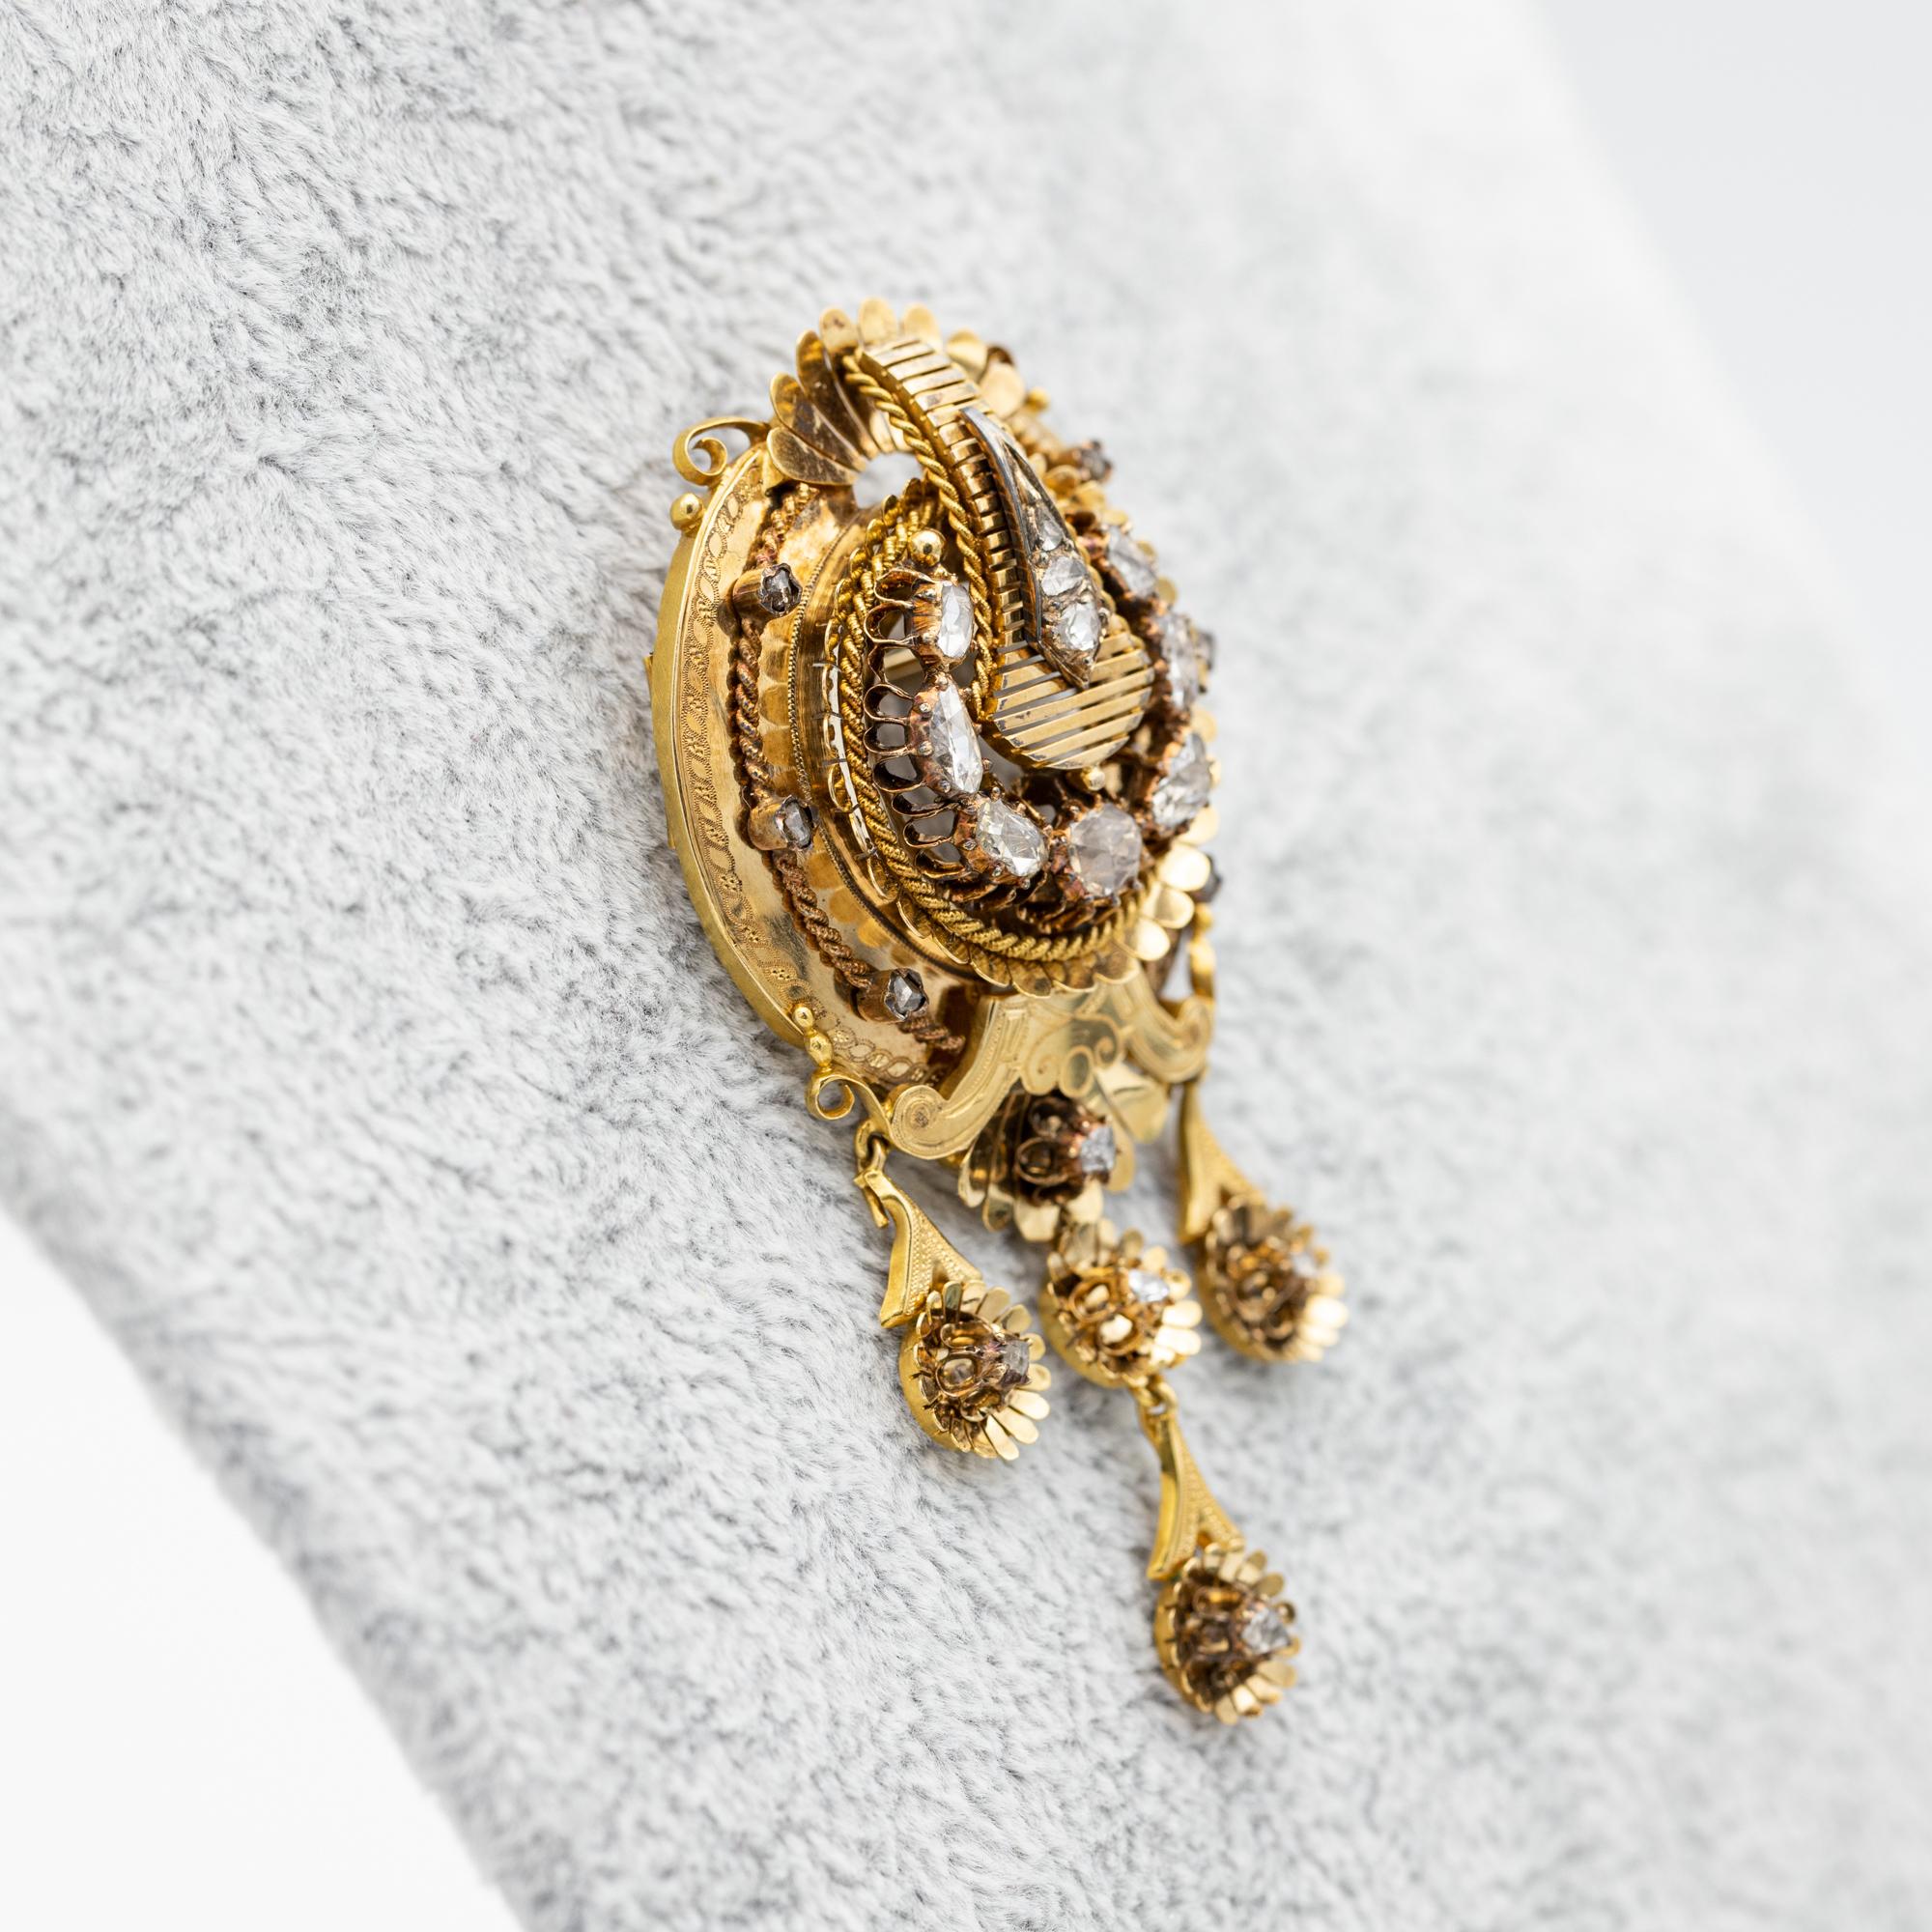 18ct yellow gold Victorian brooch - Large and heavy foiled back diamond heirloom For Sale 9